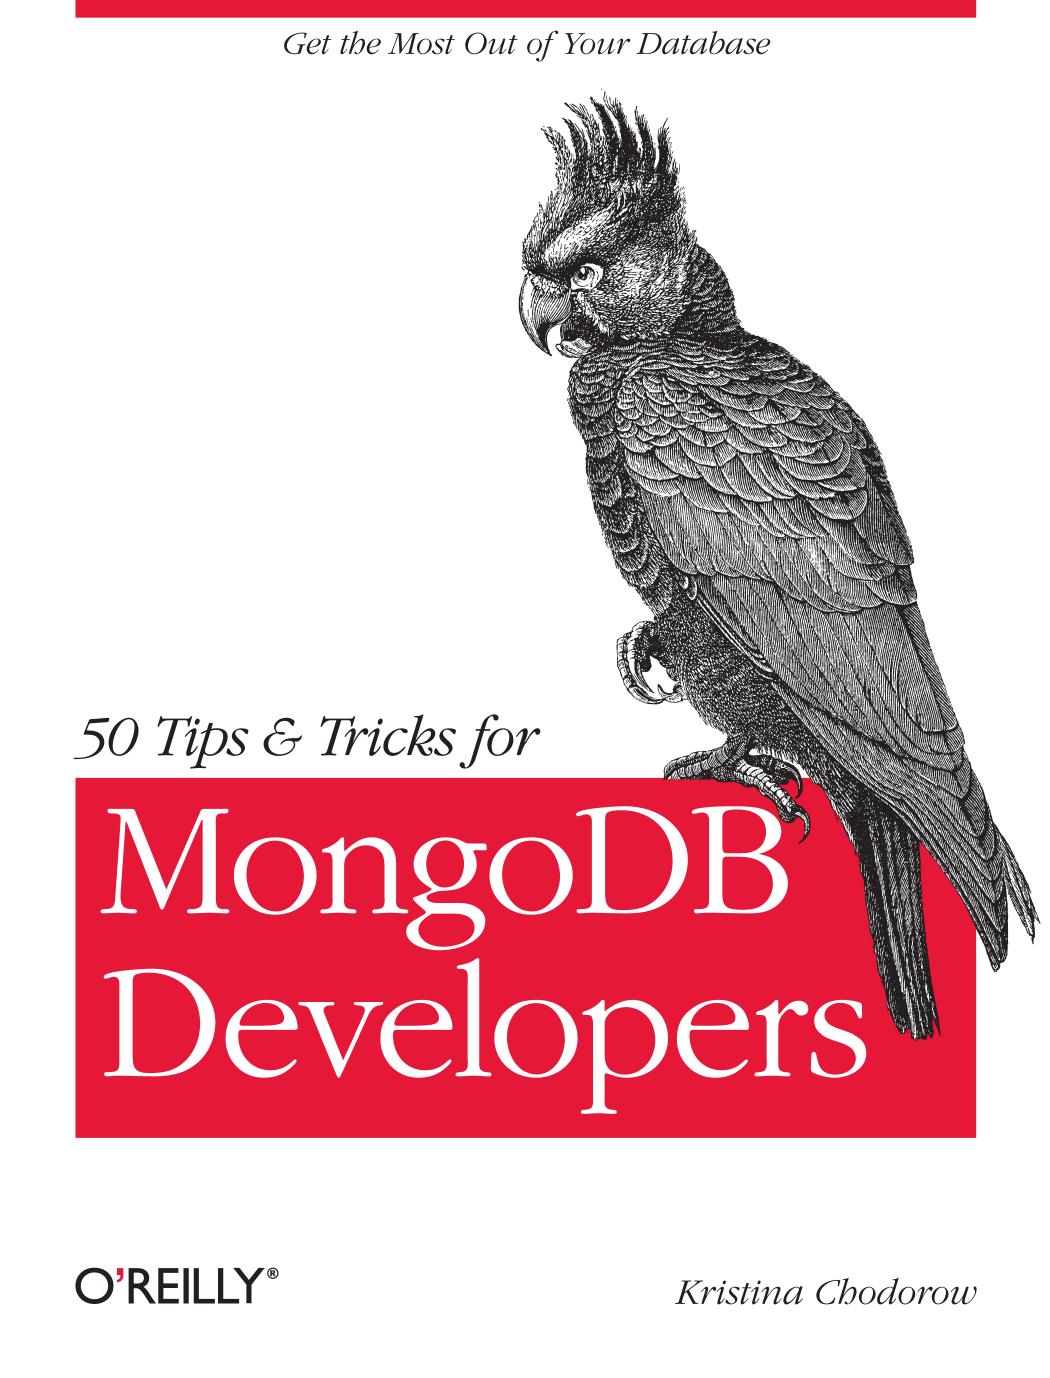 50 Tips and Tricks for MongoDB Developers by Kristina Chodorow